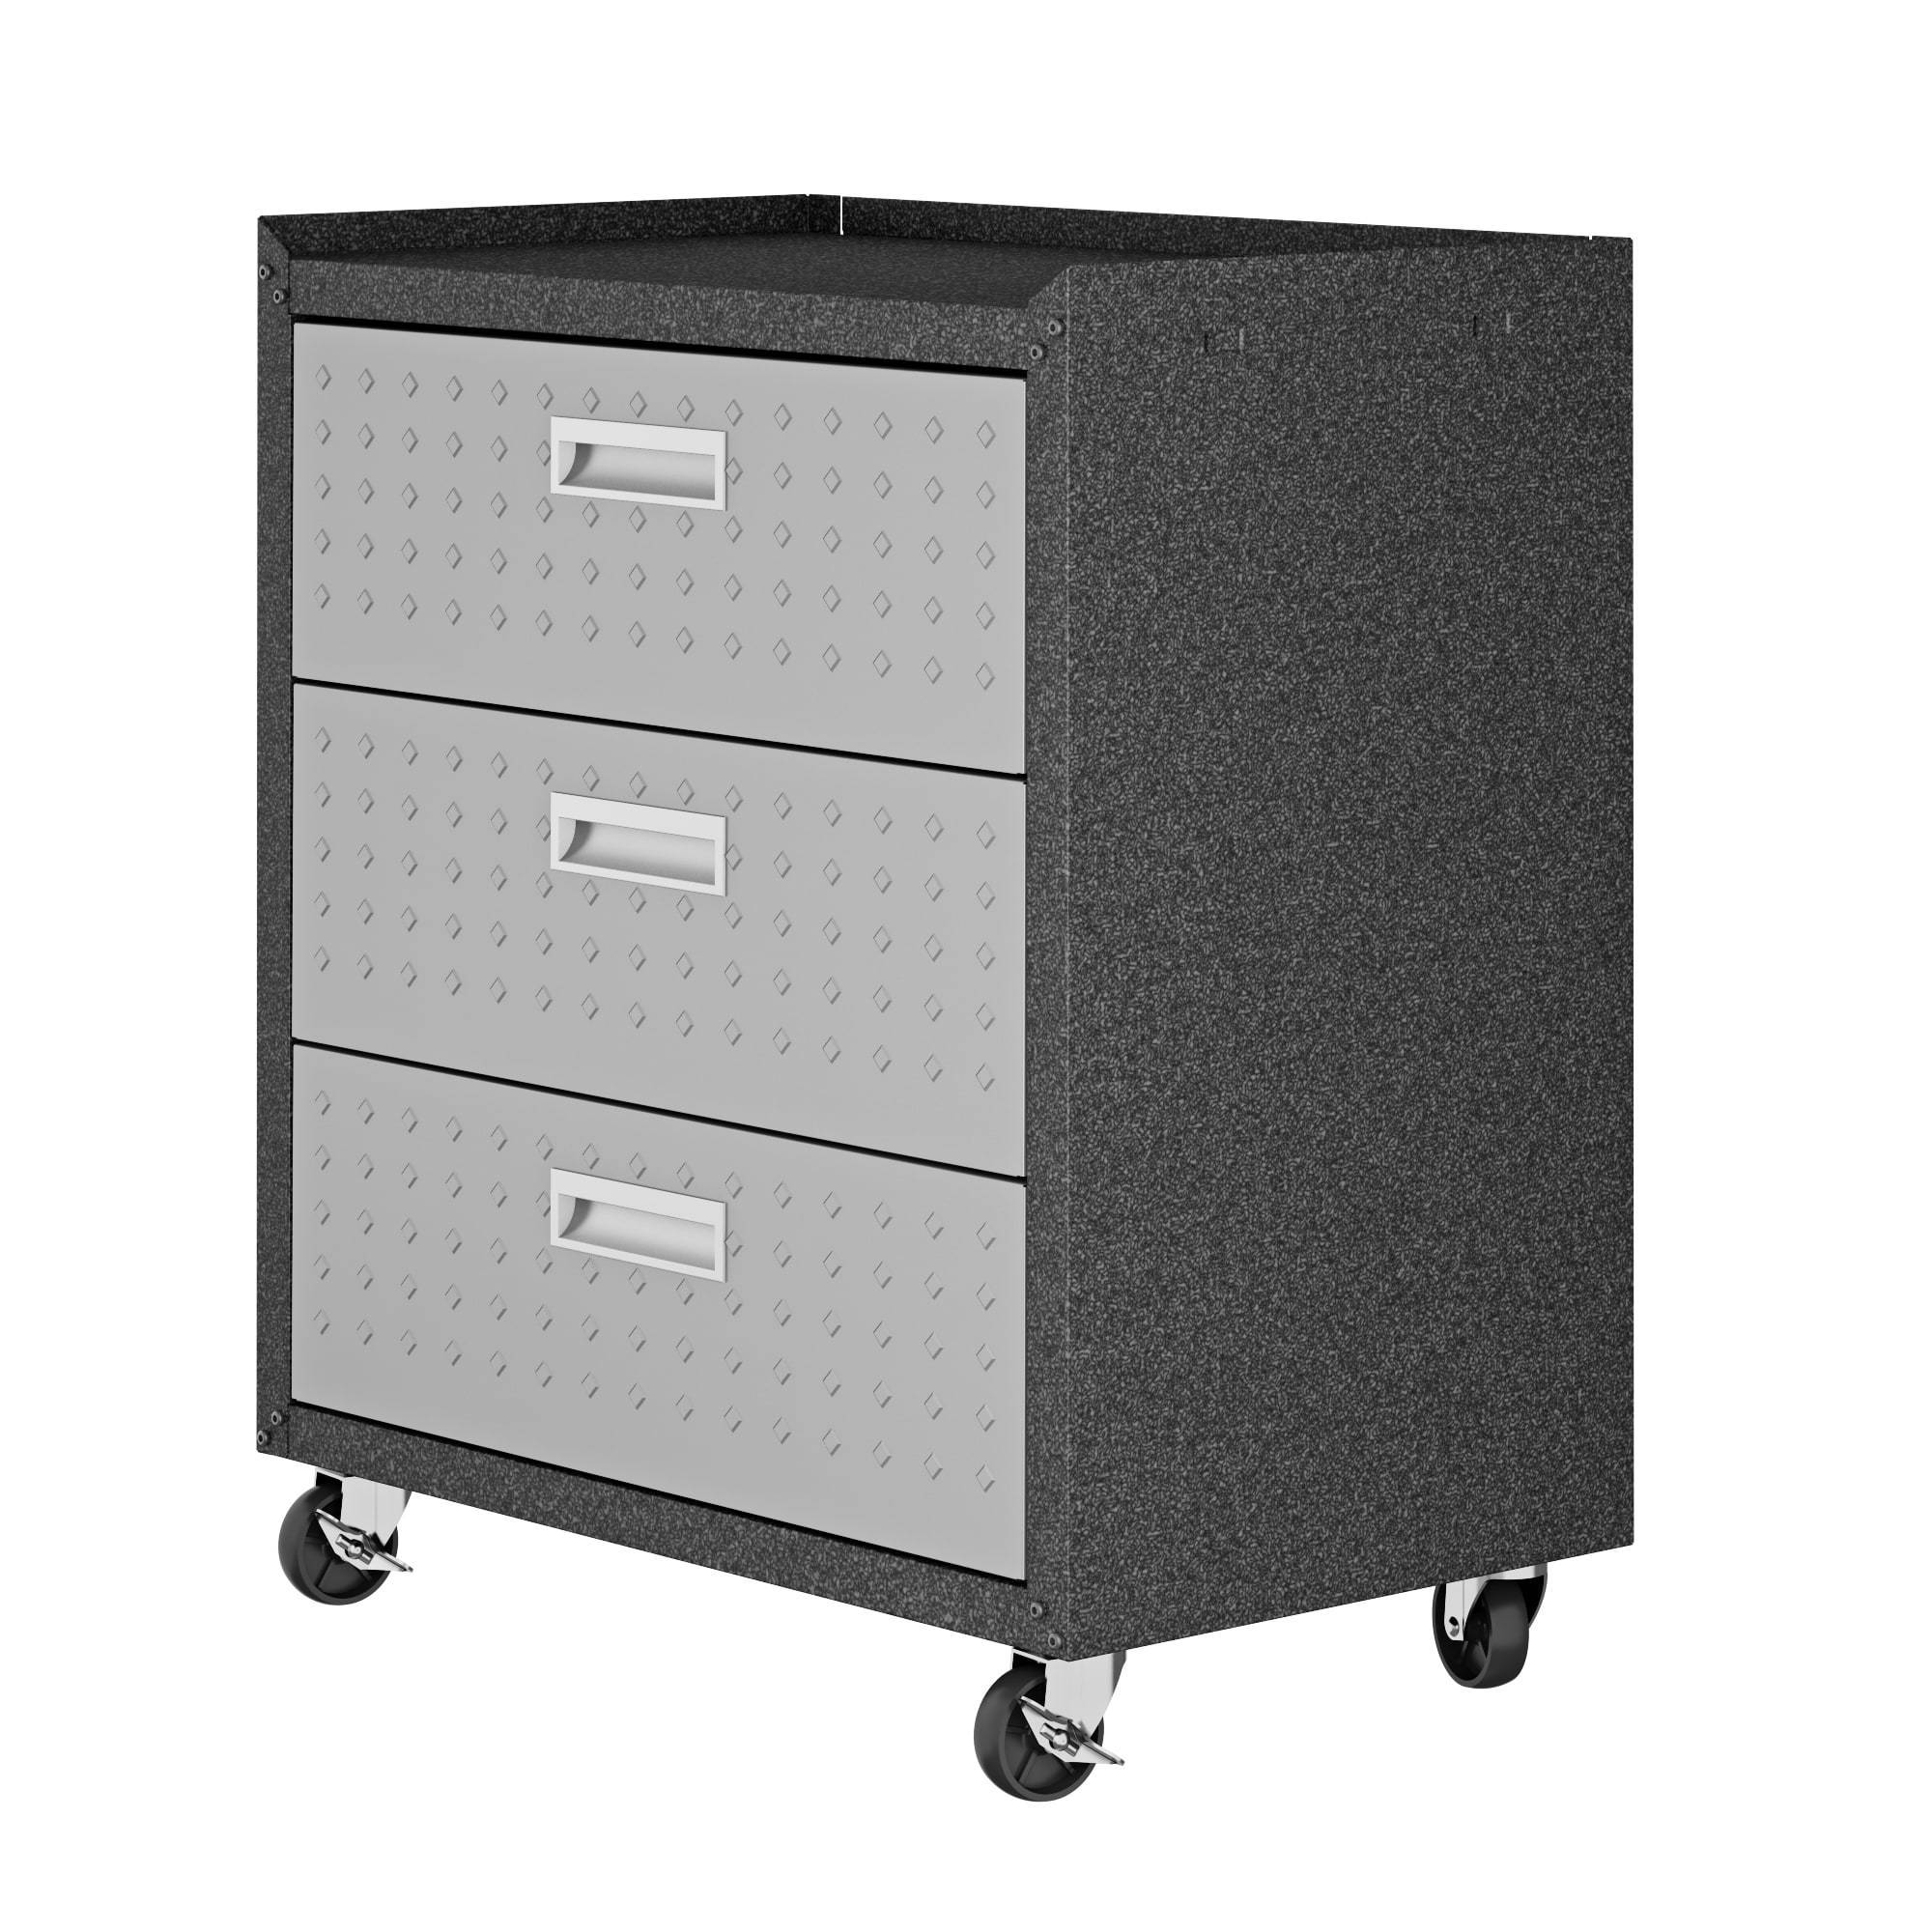 Manhattan Comfort, Fortress Mobile Garage Drawer Chest in Grey, Height 32.1 in, Width 30.3 in, Color Gray, Model 4GMCC